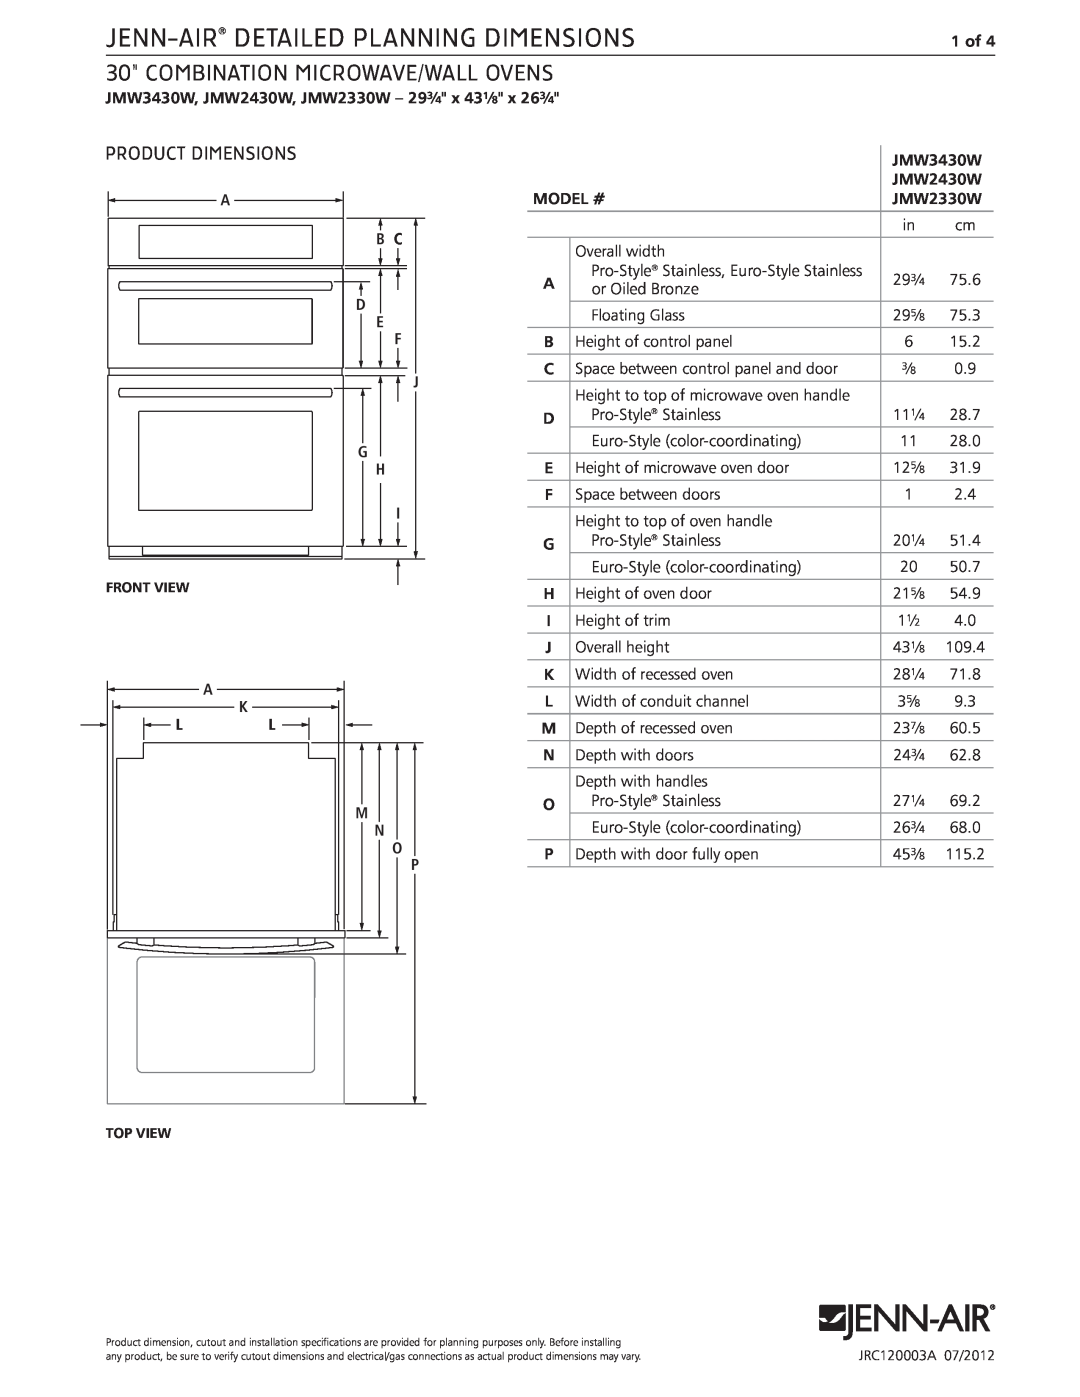 Jenn-Air JMW2430W dimensions Jenn-Air Detailed Planning Dimensions, combination microwave/wall ovens, Product Dimensions 